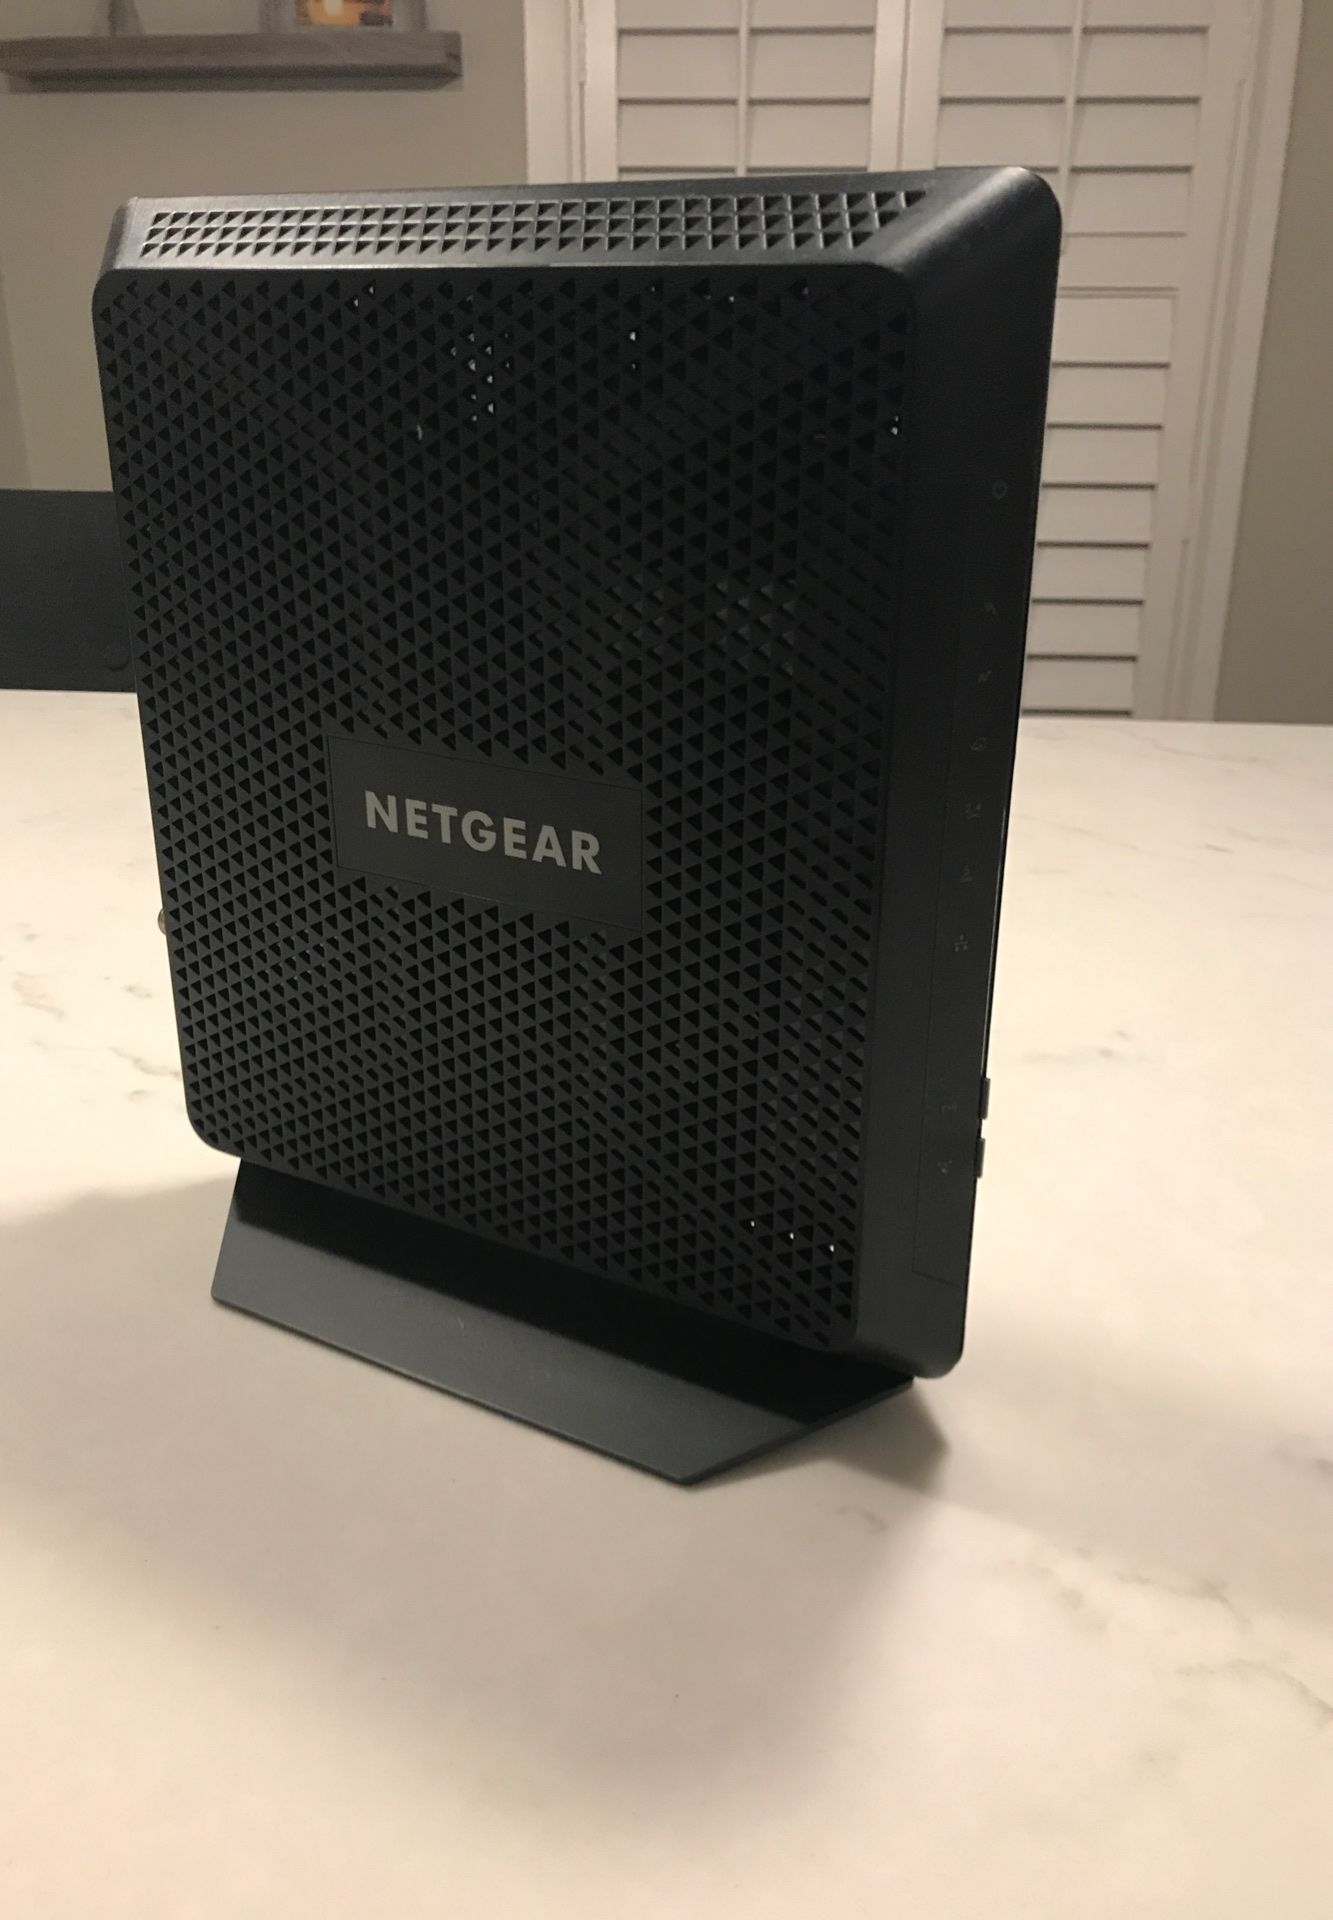 NETGEAR AC1900 wifi cable router..1 yr used, perfect shape